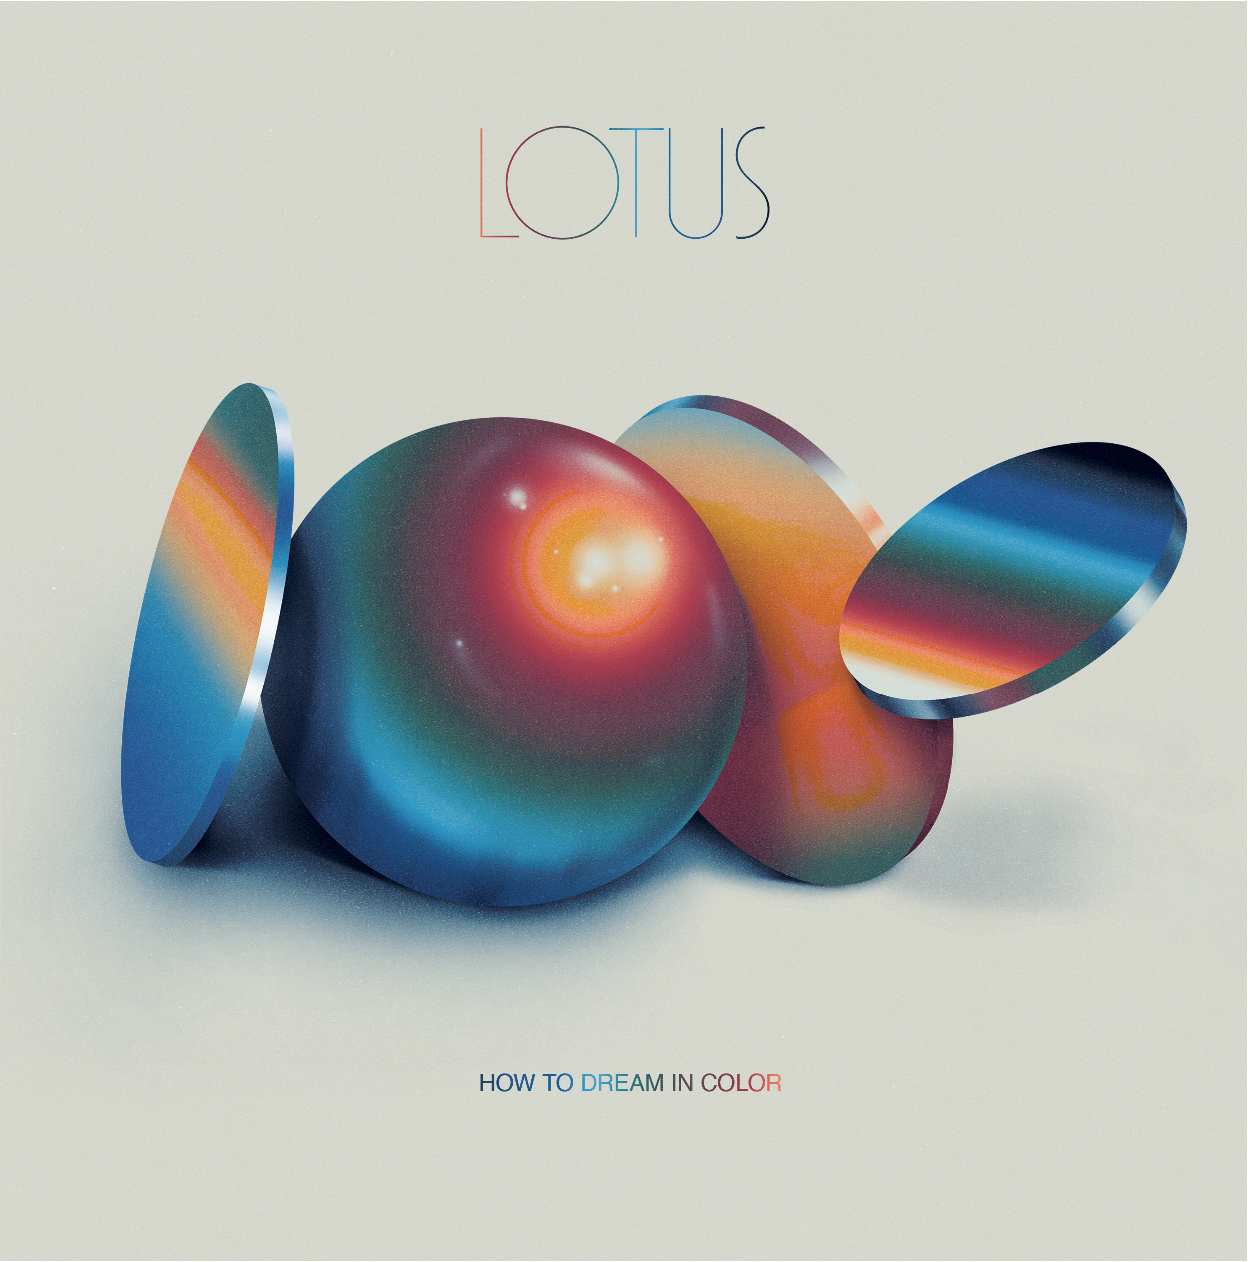 Lotus  - “How to Dream in Color”  (Lotus Vibes) 